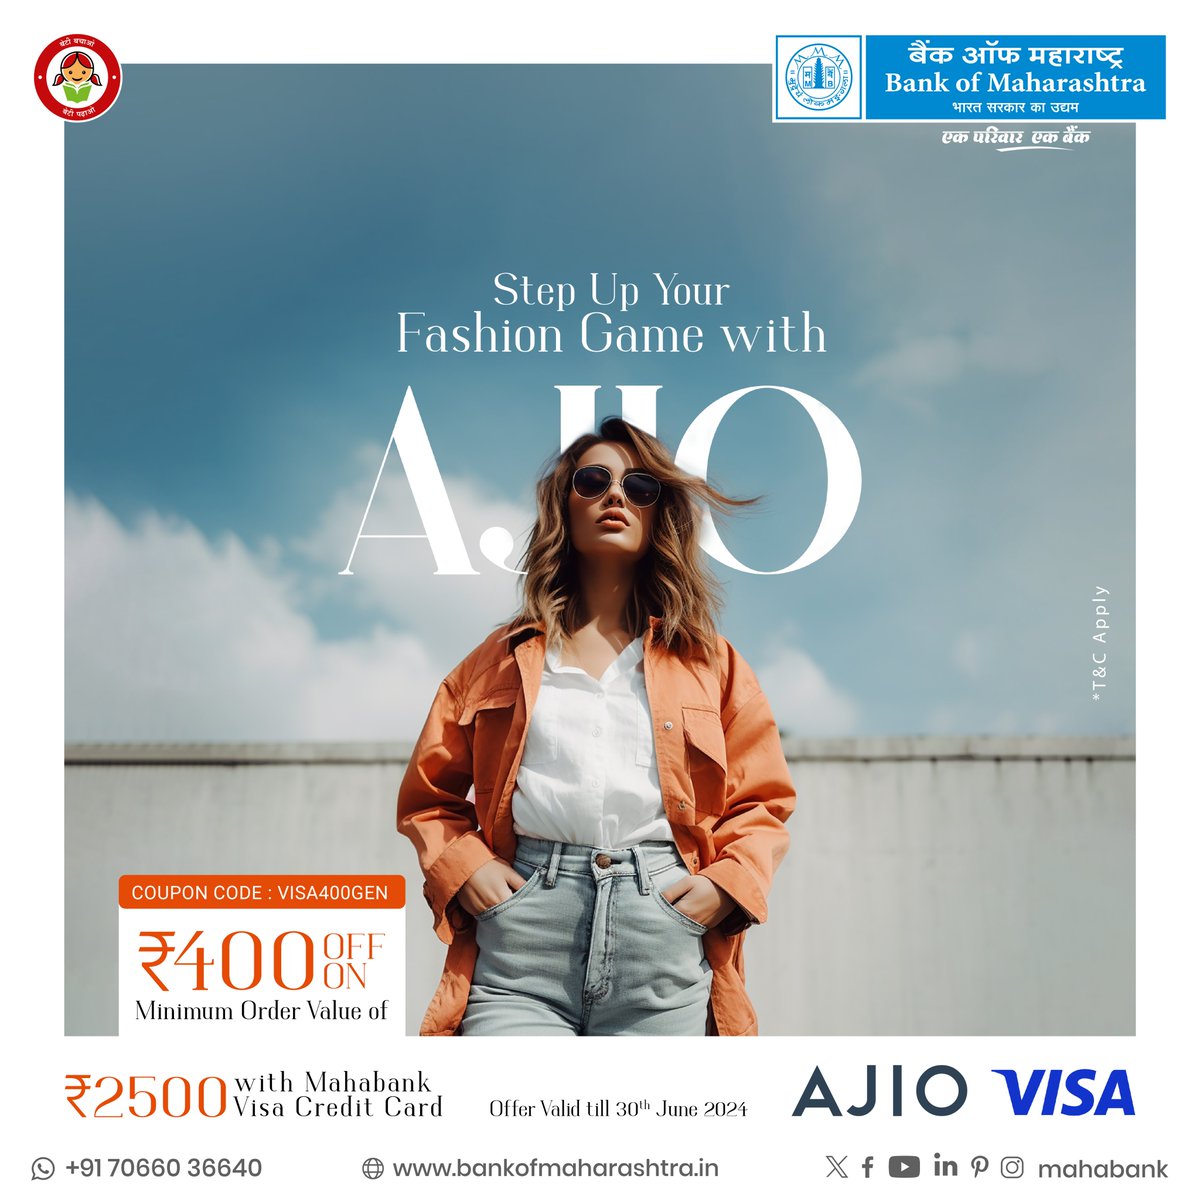 Upgrade your fashion with Ajio! Save ₹400 on orders over ₹2500 when you use your #Mahabank #VisaCreditCard. Coupon code: VISA400GEN. Valid until 30th June 2024. Don't miss out on the chance to revamp your wardrobe for less. Shop now !

Apply now: bit.ly/3VfJFKS